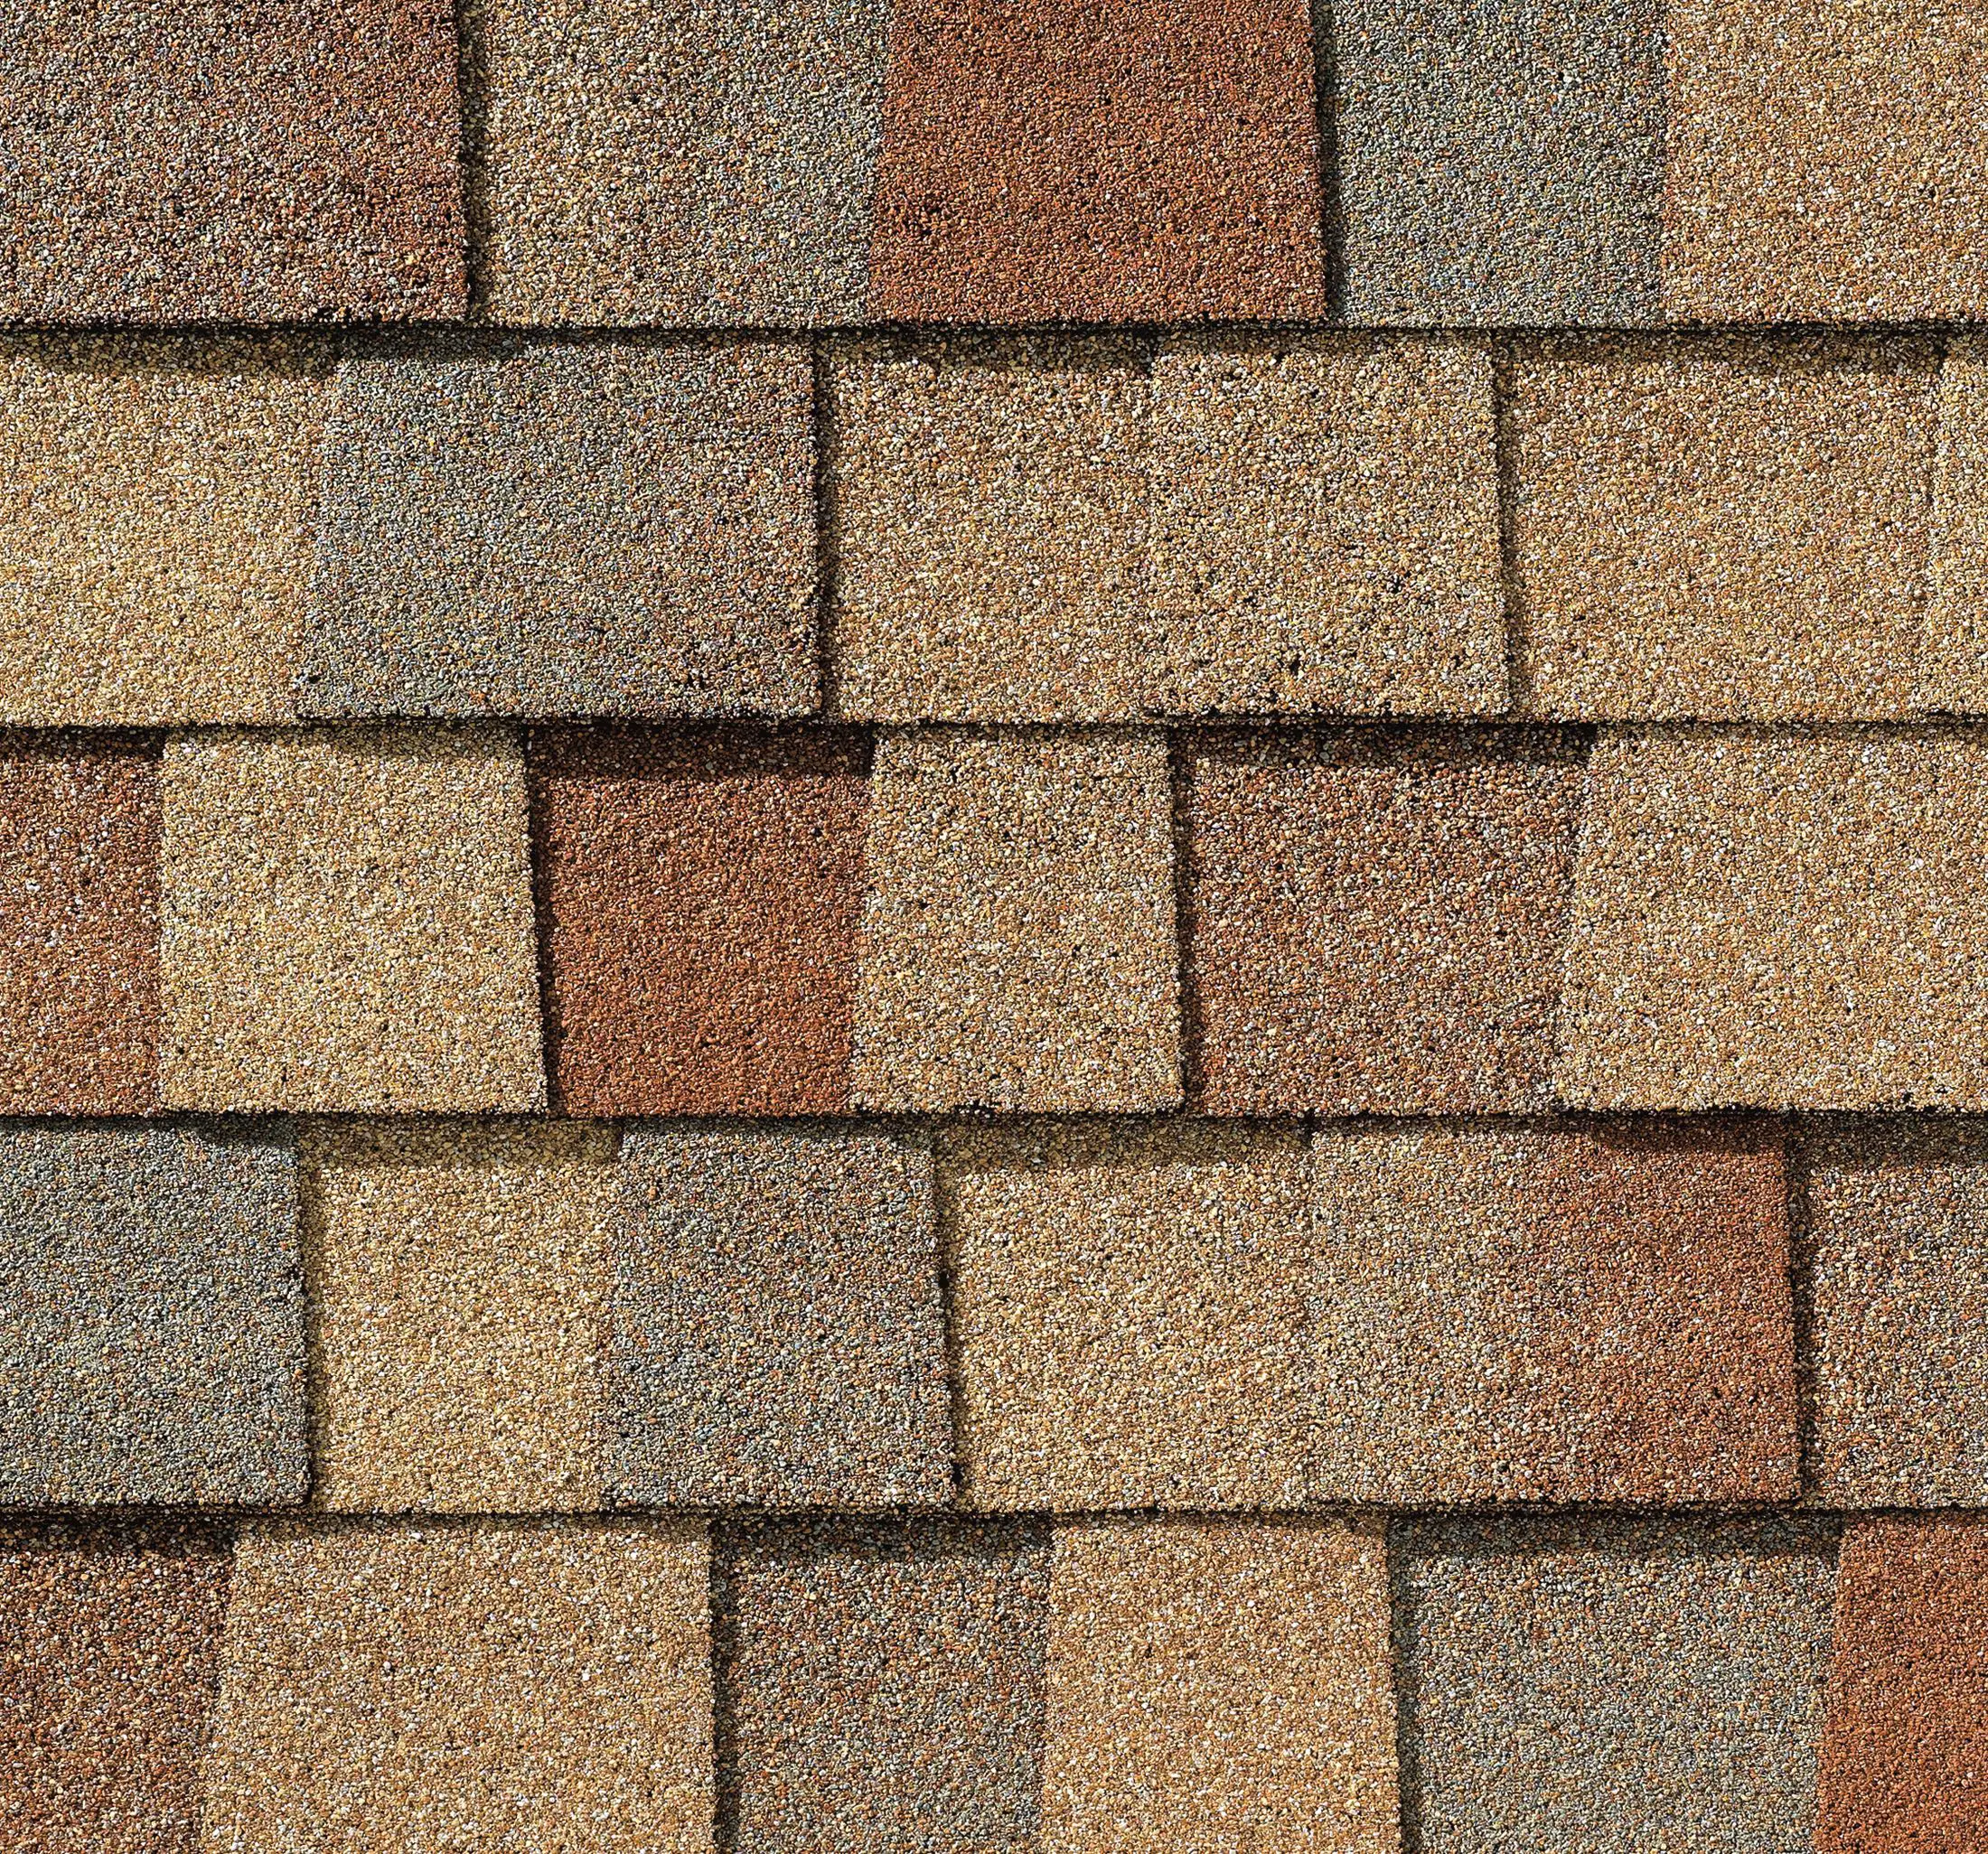 Architectural shingles roof, Architectural shingles, Roof architecture